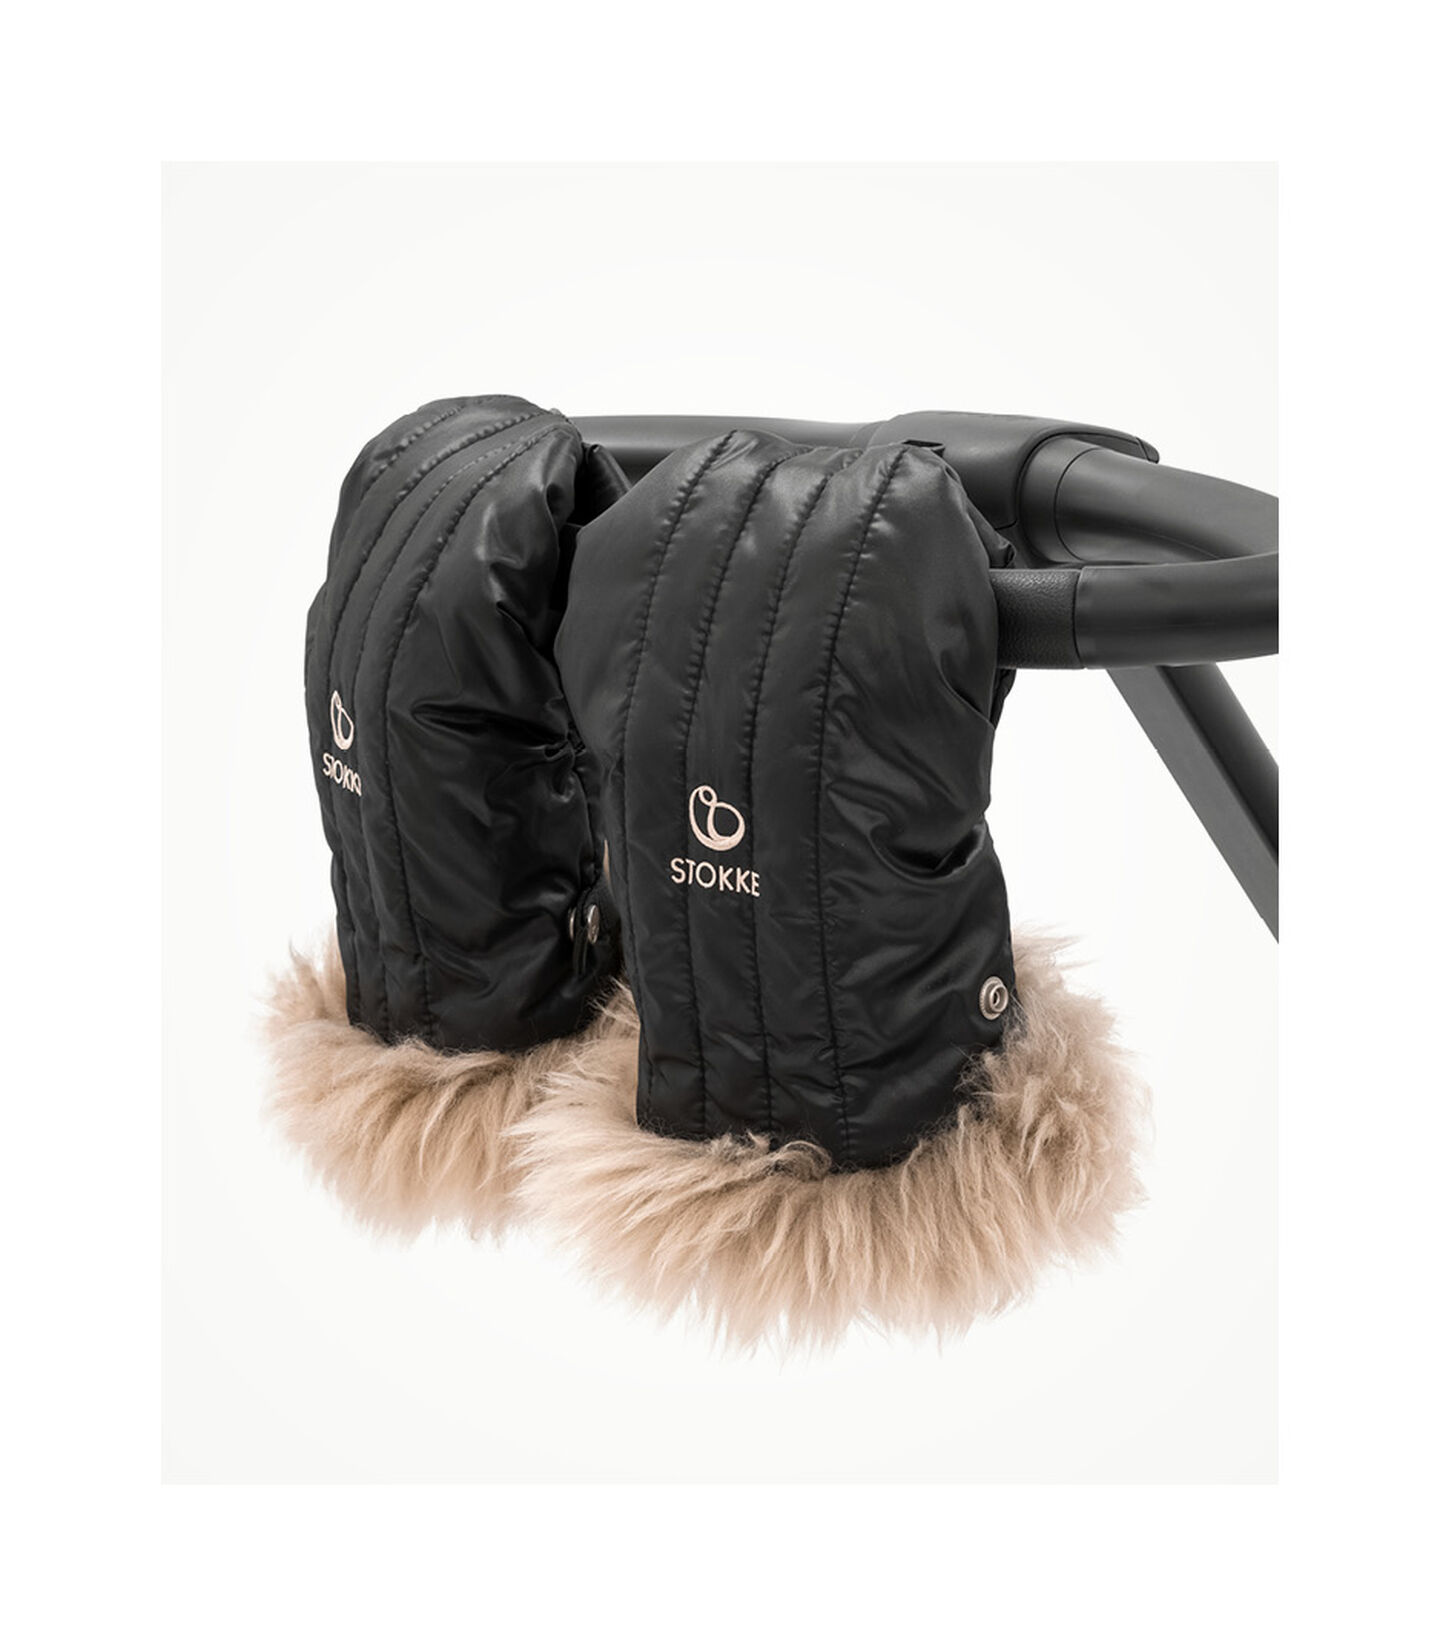 Stokke® Stroller Mittens Onyx Black, 瑪瑙黑色, mainview view 3